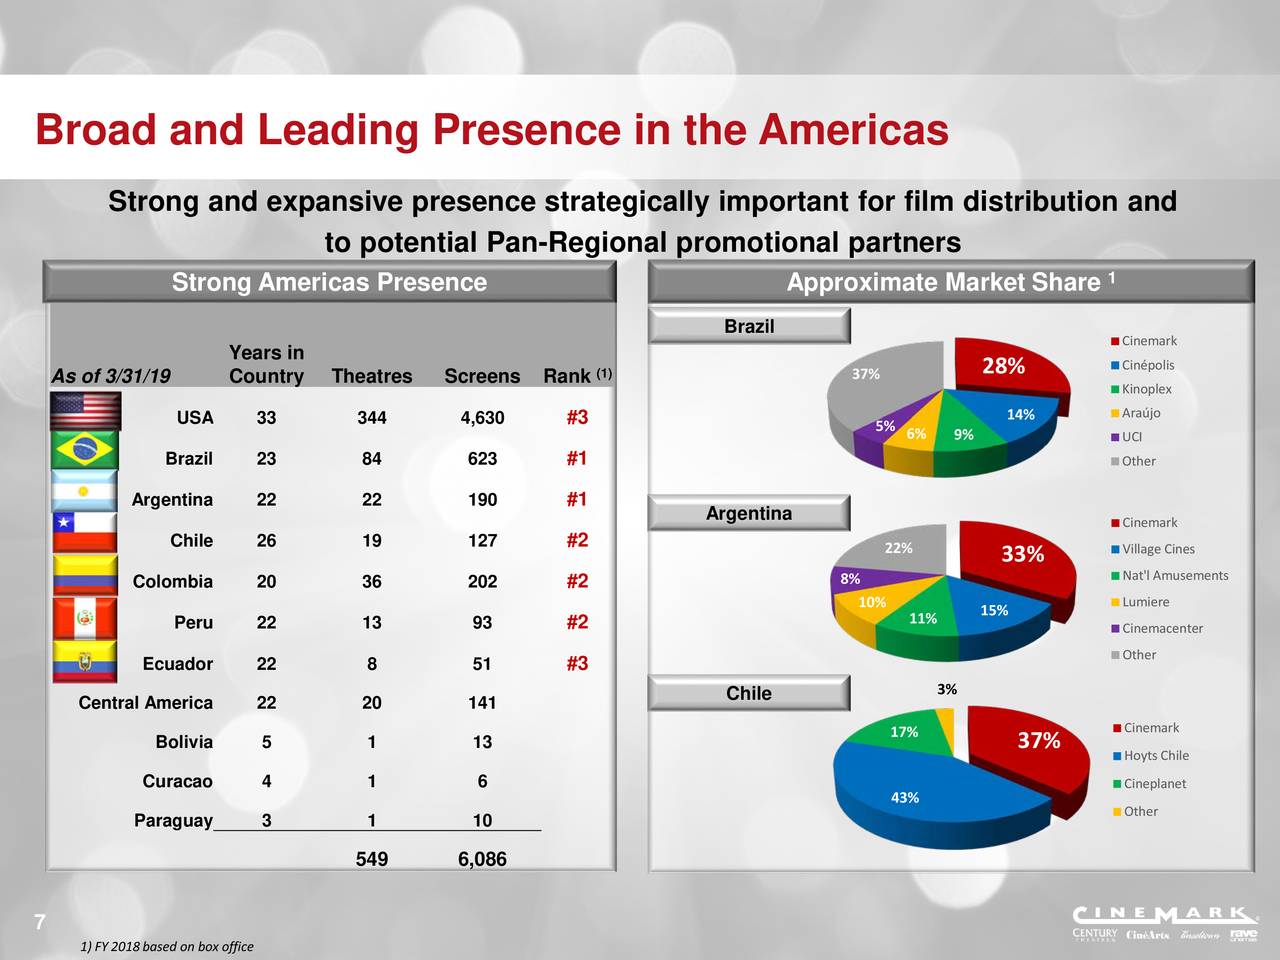 Broad and Leading Presence in the Americas